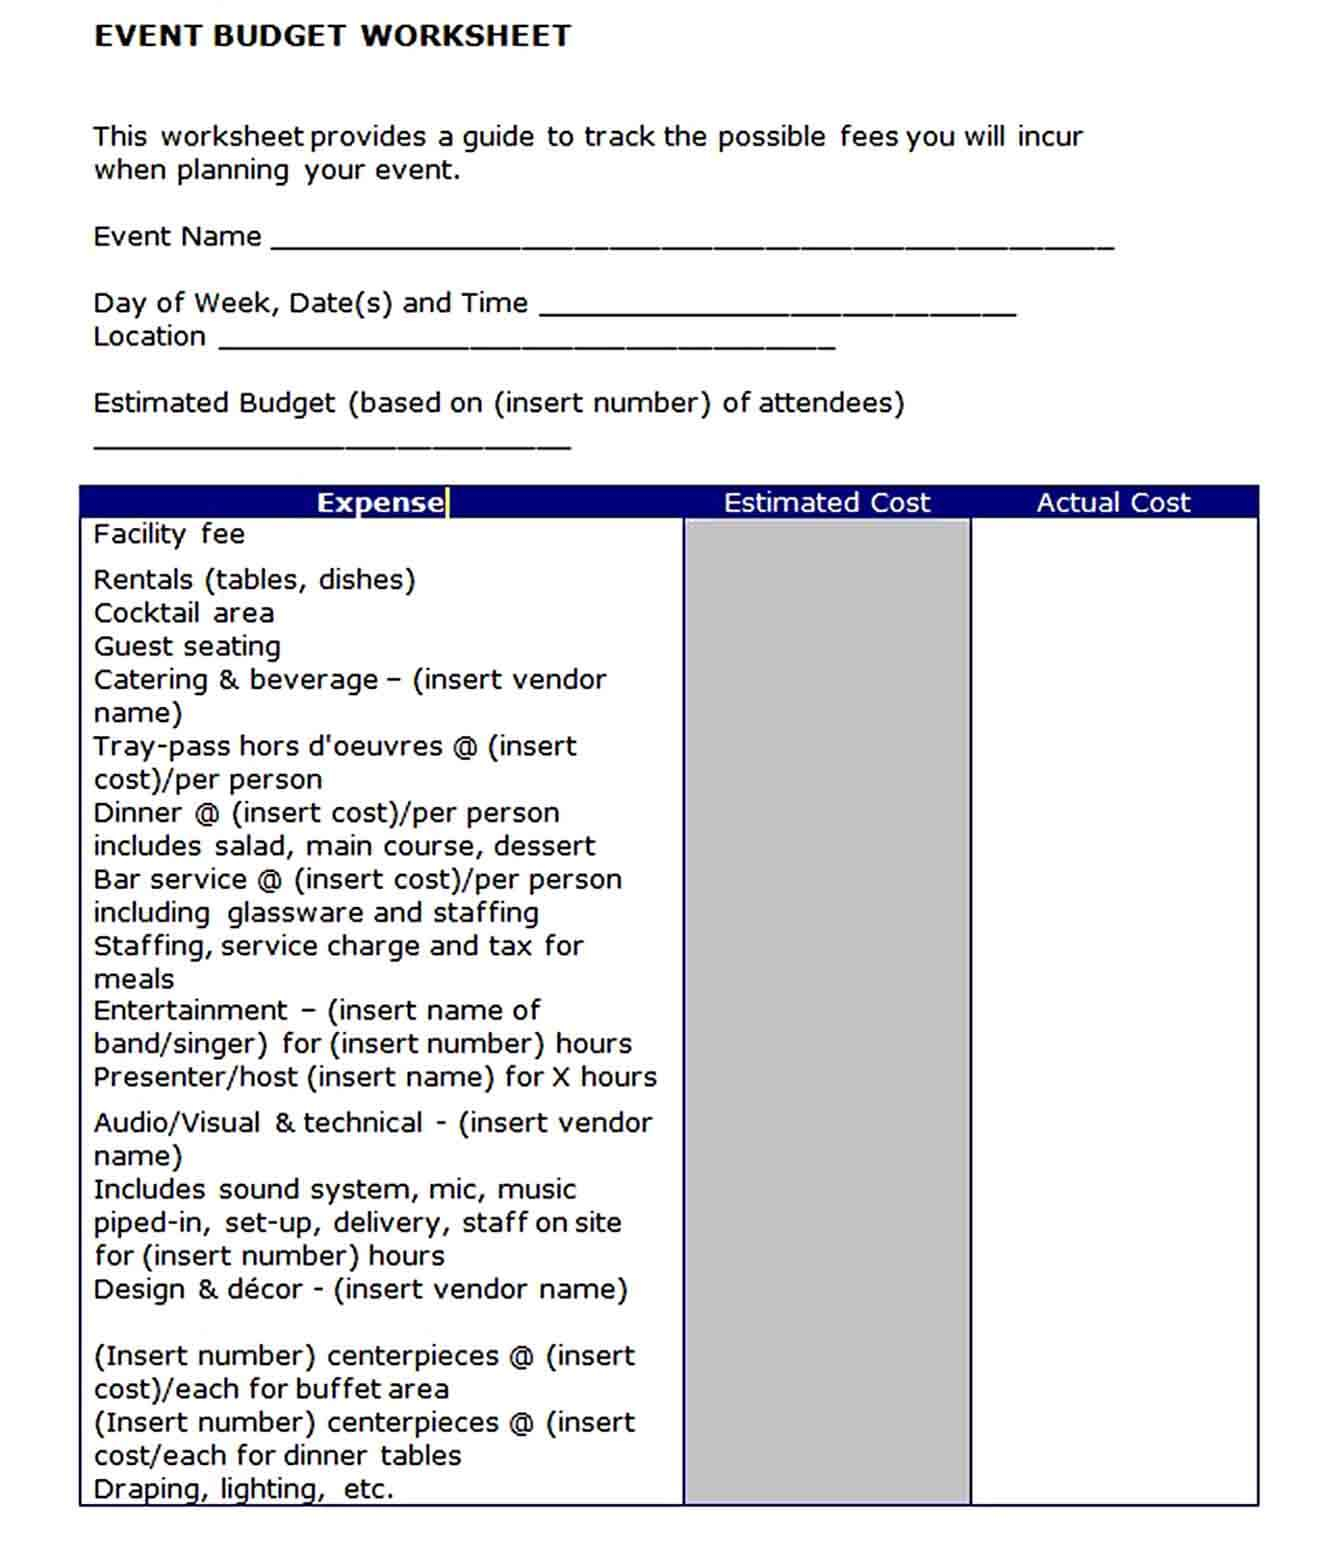 Operating Budget Sample Template  Throughout Restaurant Operating Budget Template For Restaurant Operating Budget Template